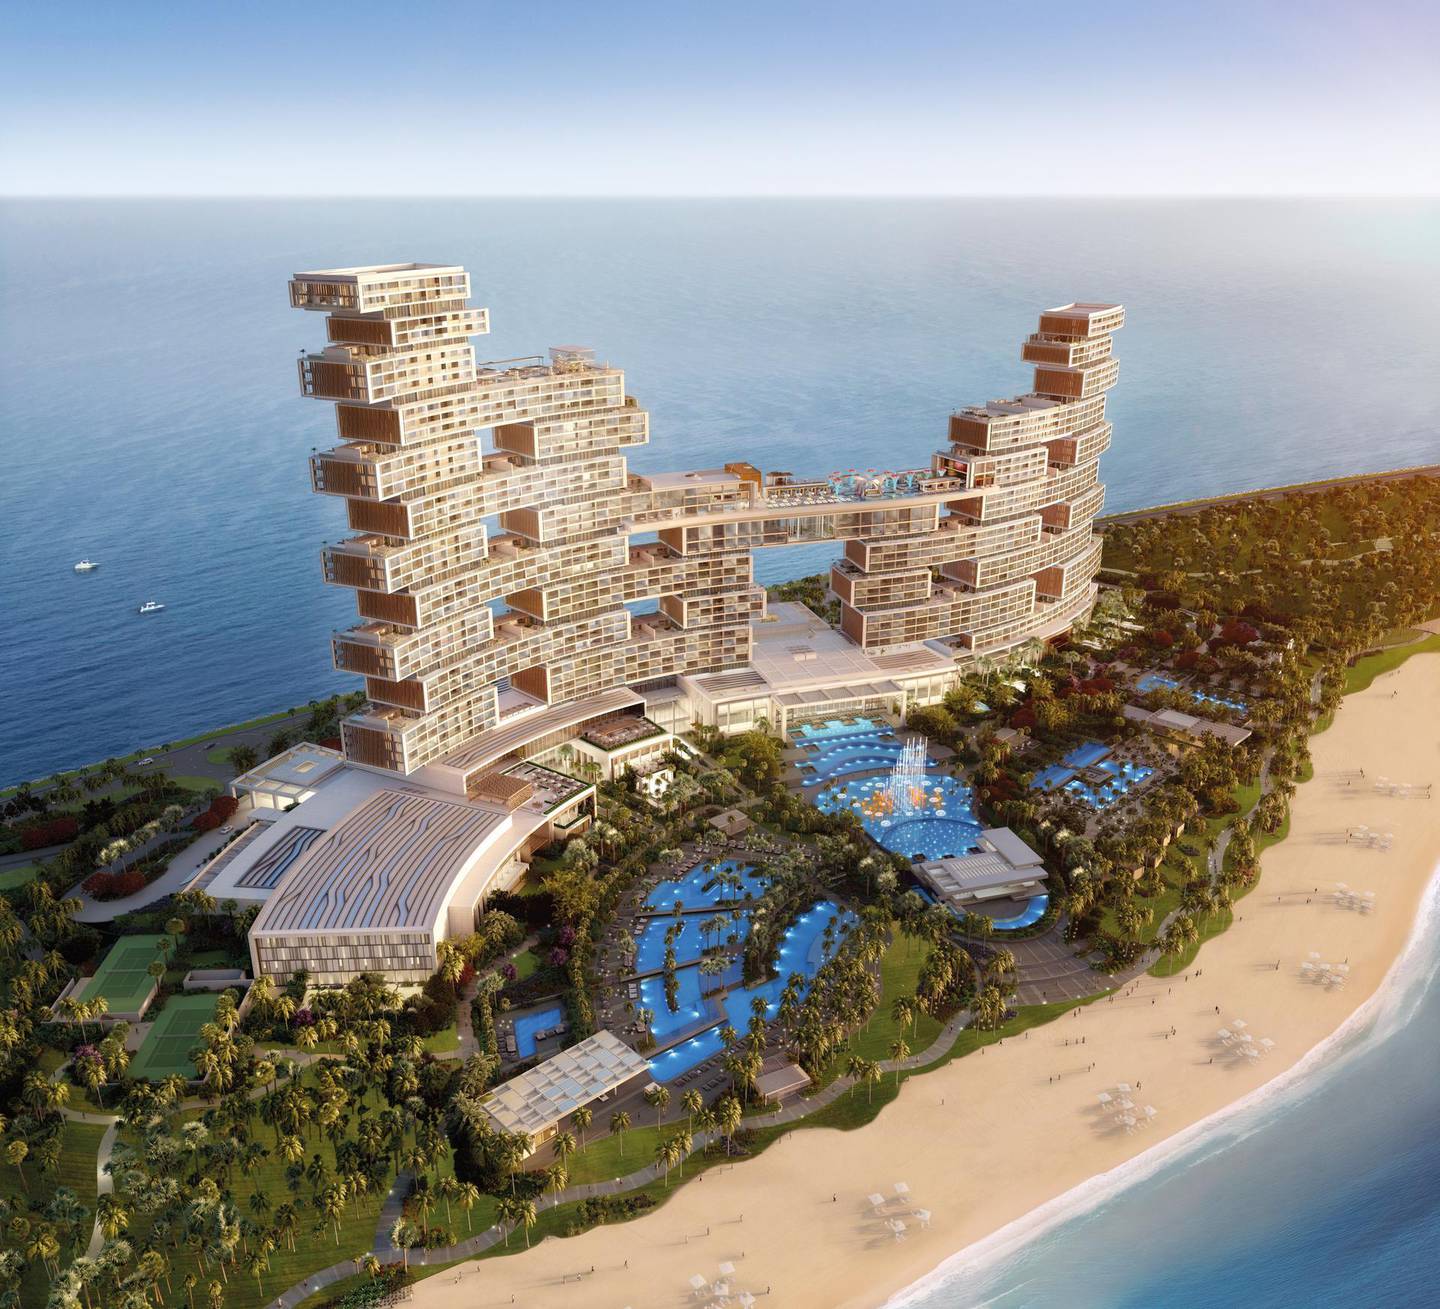 The Royal Atlantis will house several high-profile restaurants when it opens next year 